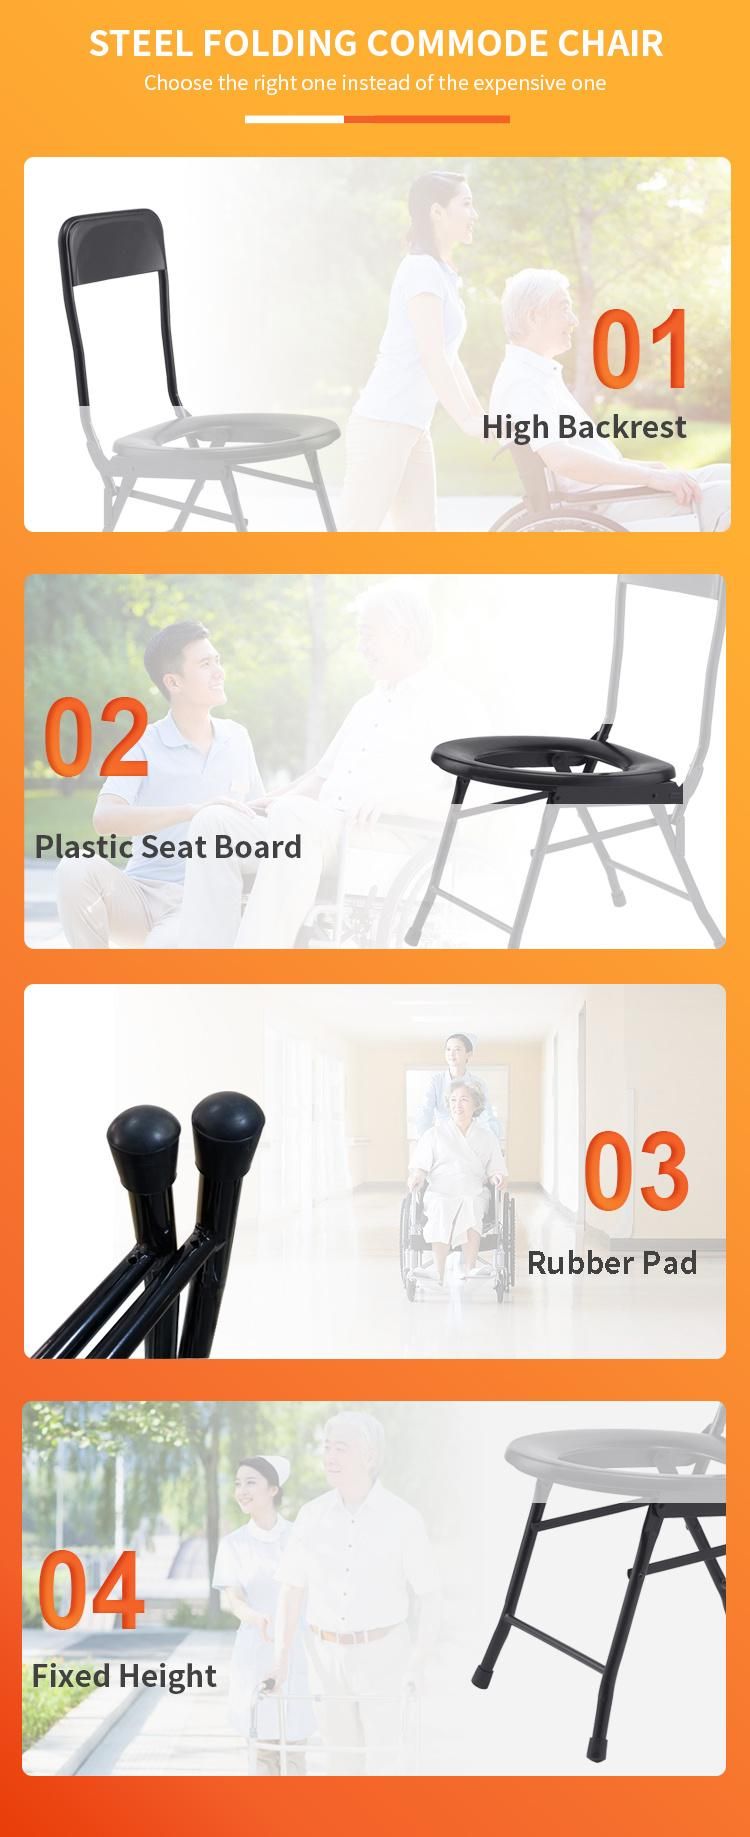 Steel Folding Commode Chair Plastic Seat Board Easy Carry portable Chair with Commode Bathroom Rehabilitation Medical Equipment for Elder Weight Capacity 100kg